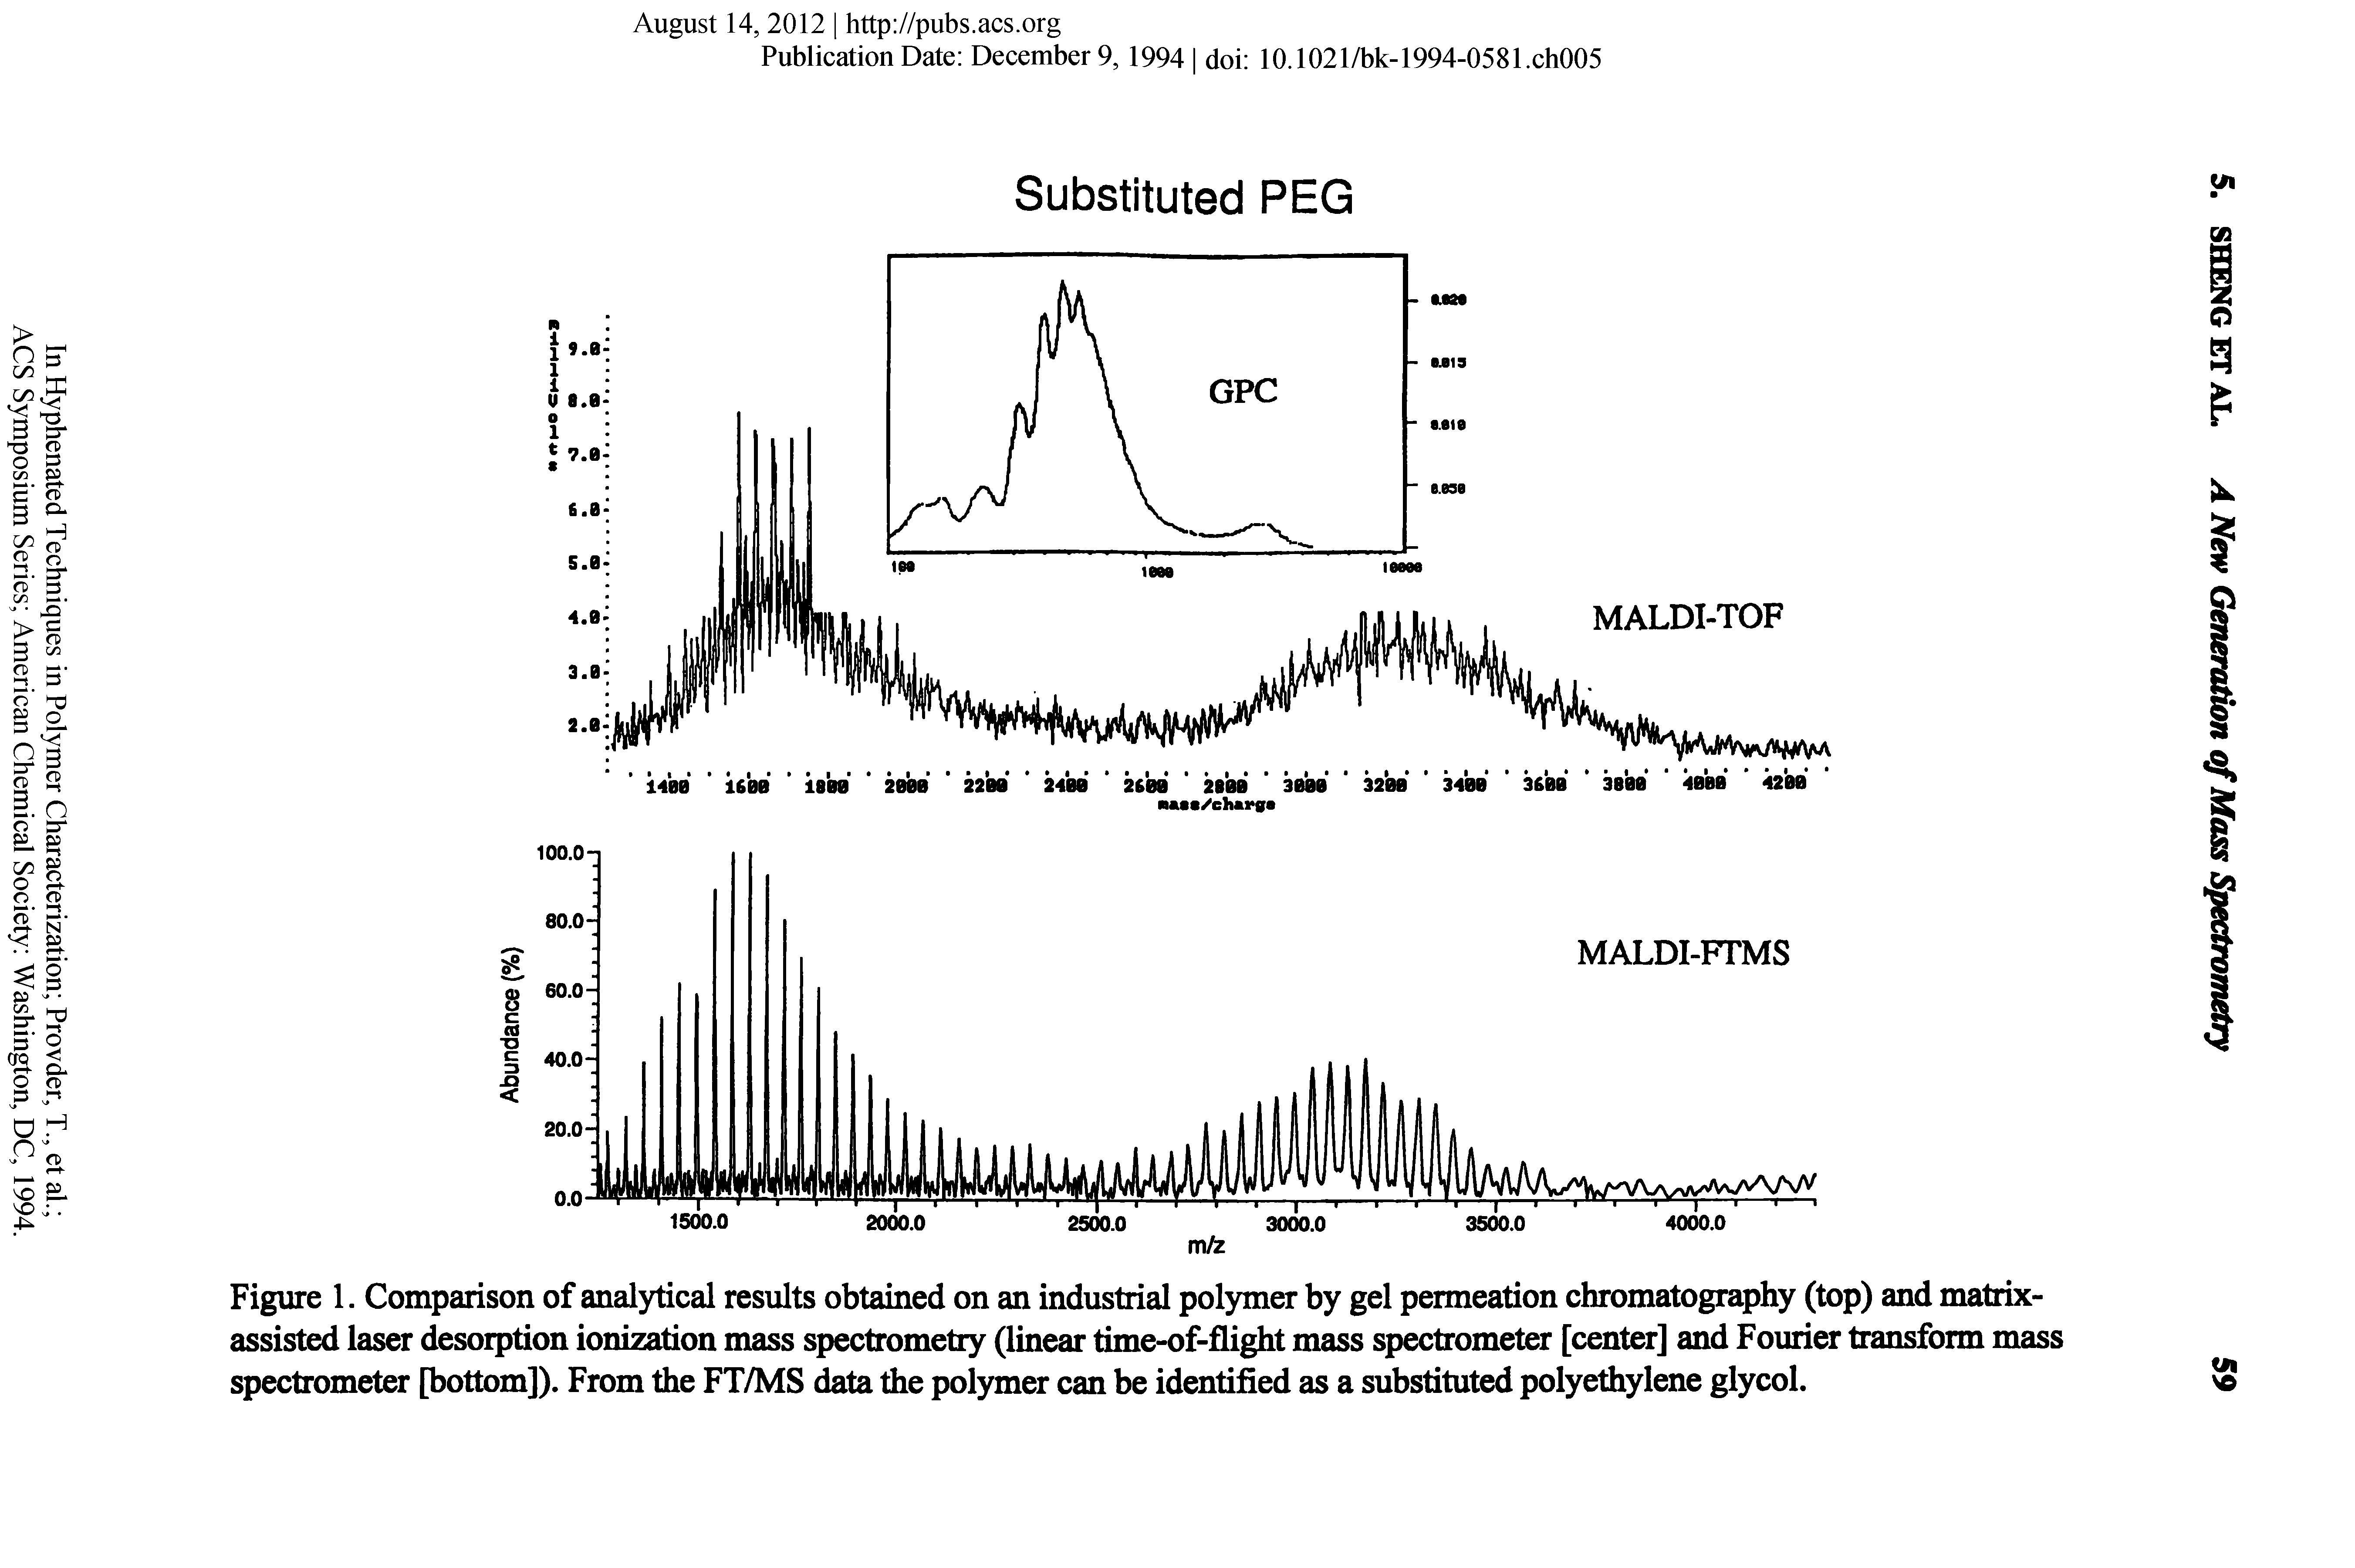 Figure 1. Comparison of analytical results obtained on an industrial polymer by gel permeation chromatography (top) and matrix-assisted laser desorption ionization mass spectrometry (linear time-of-flight mass spectrometer [center] and Fourier transform mass spectrometer [bottom]). From the FT/MS data the polymer can be identified as a substituted polyethylene glycol.